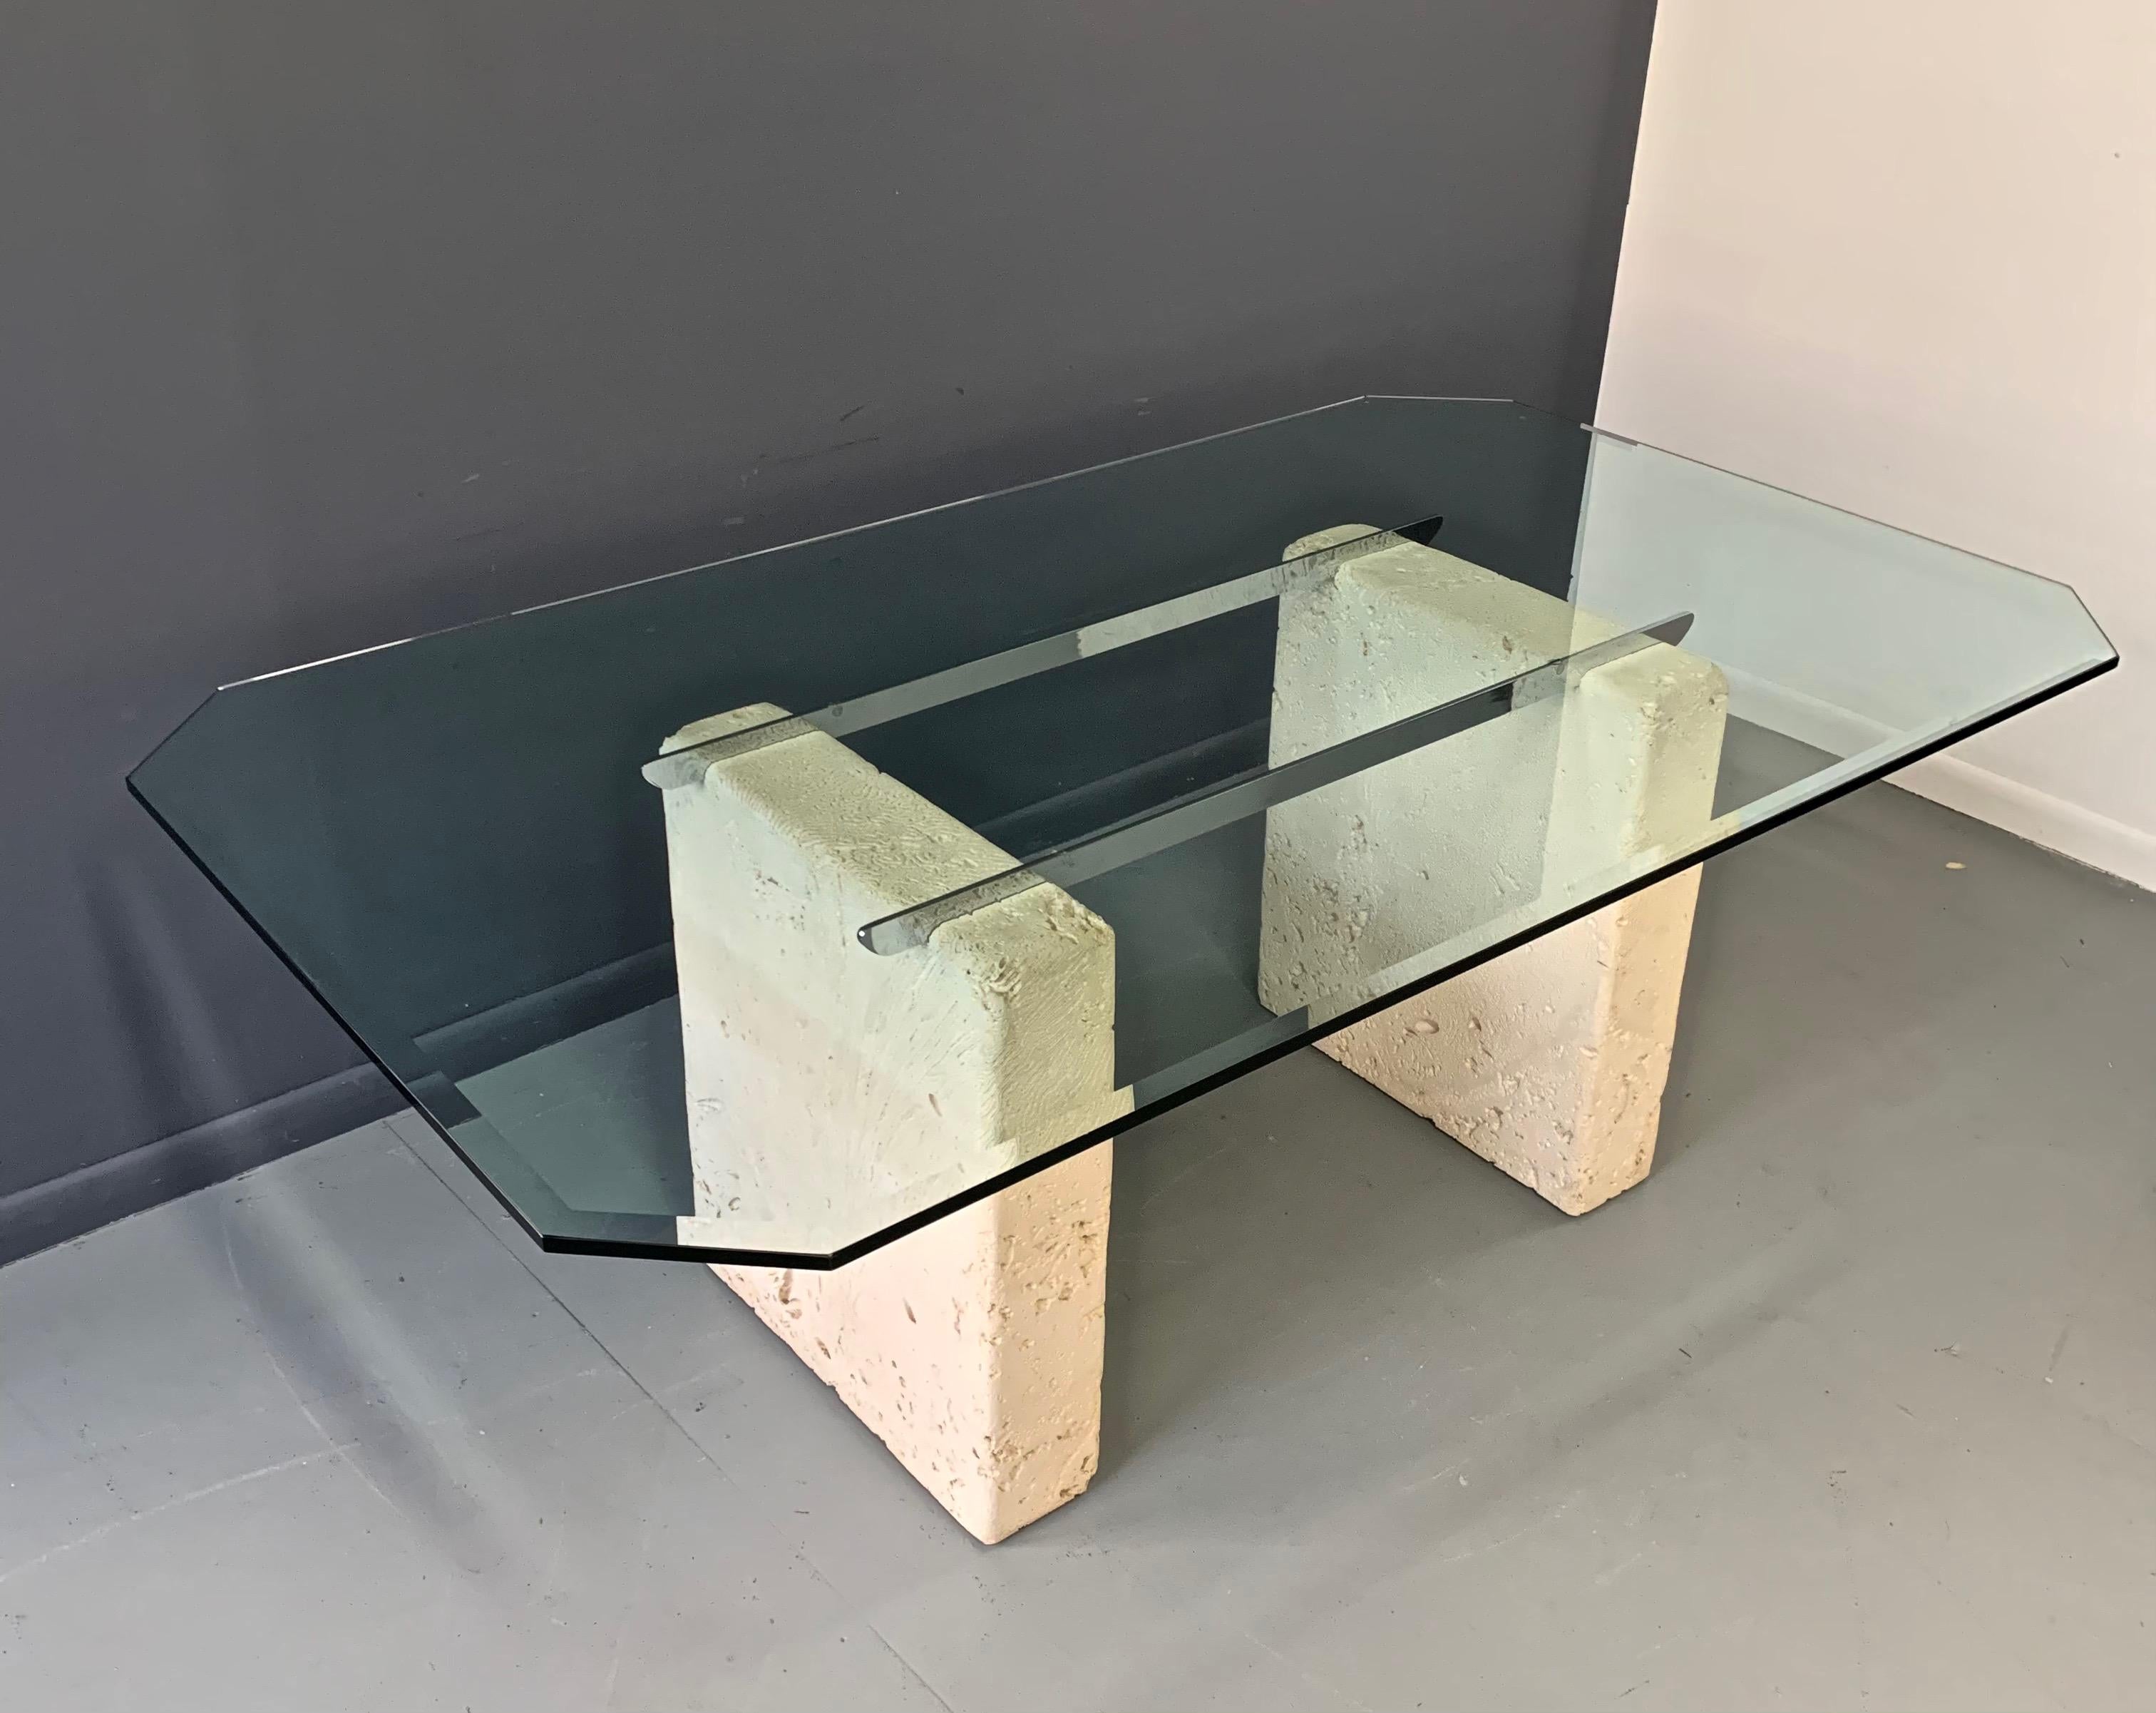 This incredible dining table has two pedestals that are ceramic and have been impressed with a brain coral design and are then held in place by two chrome bars.